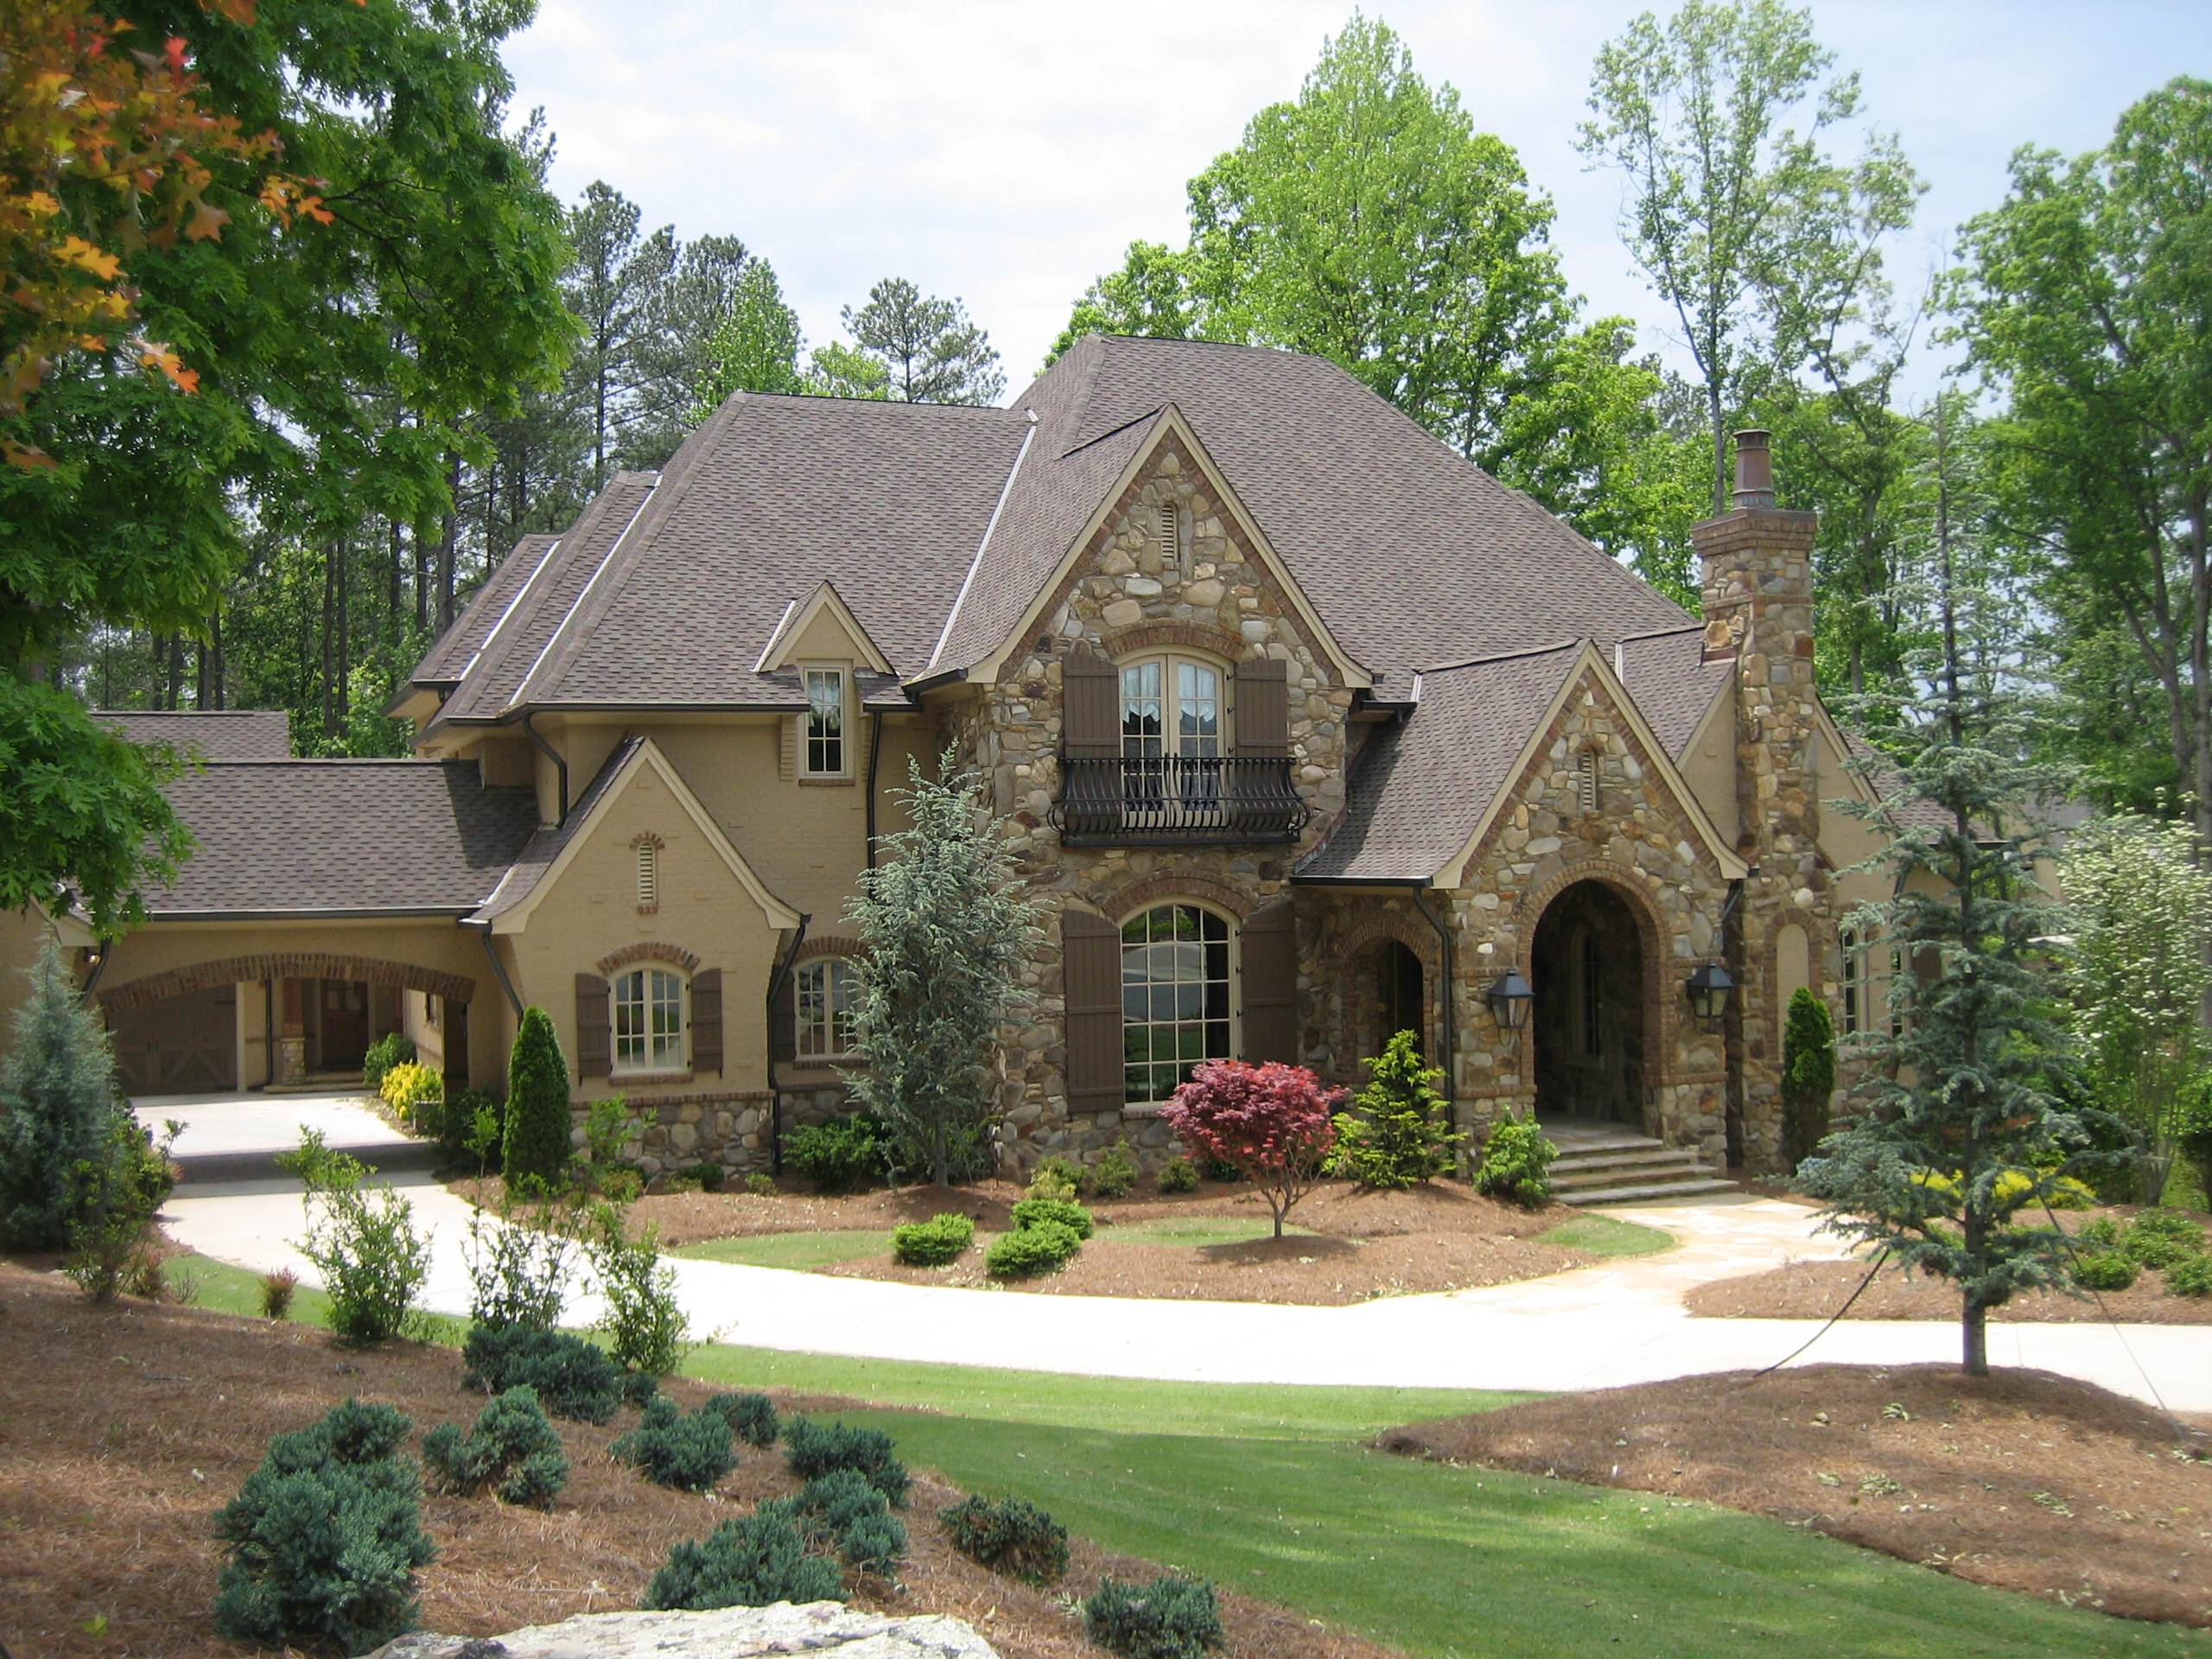 HOMES BUILT IN THE RIVER CLUB, SUWANEE - Traditional - Exterior - Atlanta -  by Adams Residential, LLC | Houzz